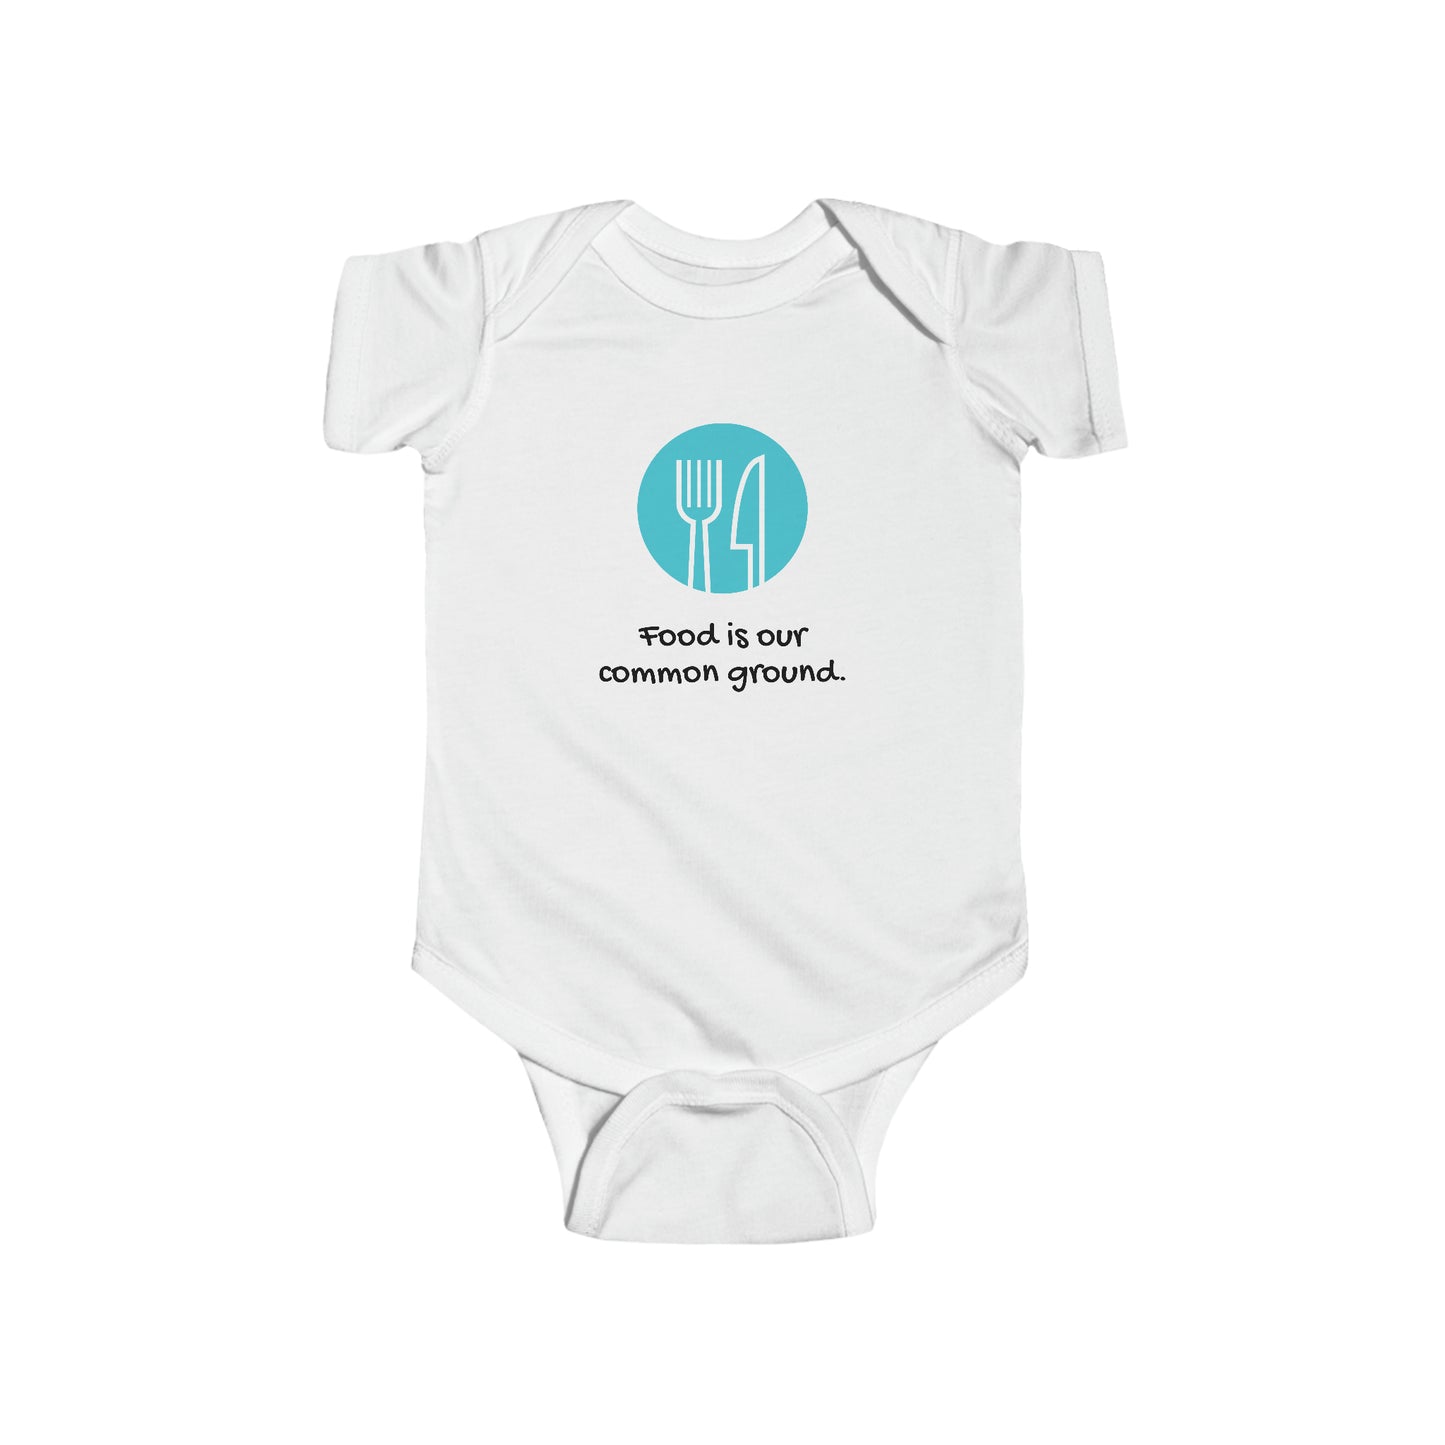 Infant Fine Jersey Bodysuit - Food is our common ground